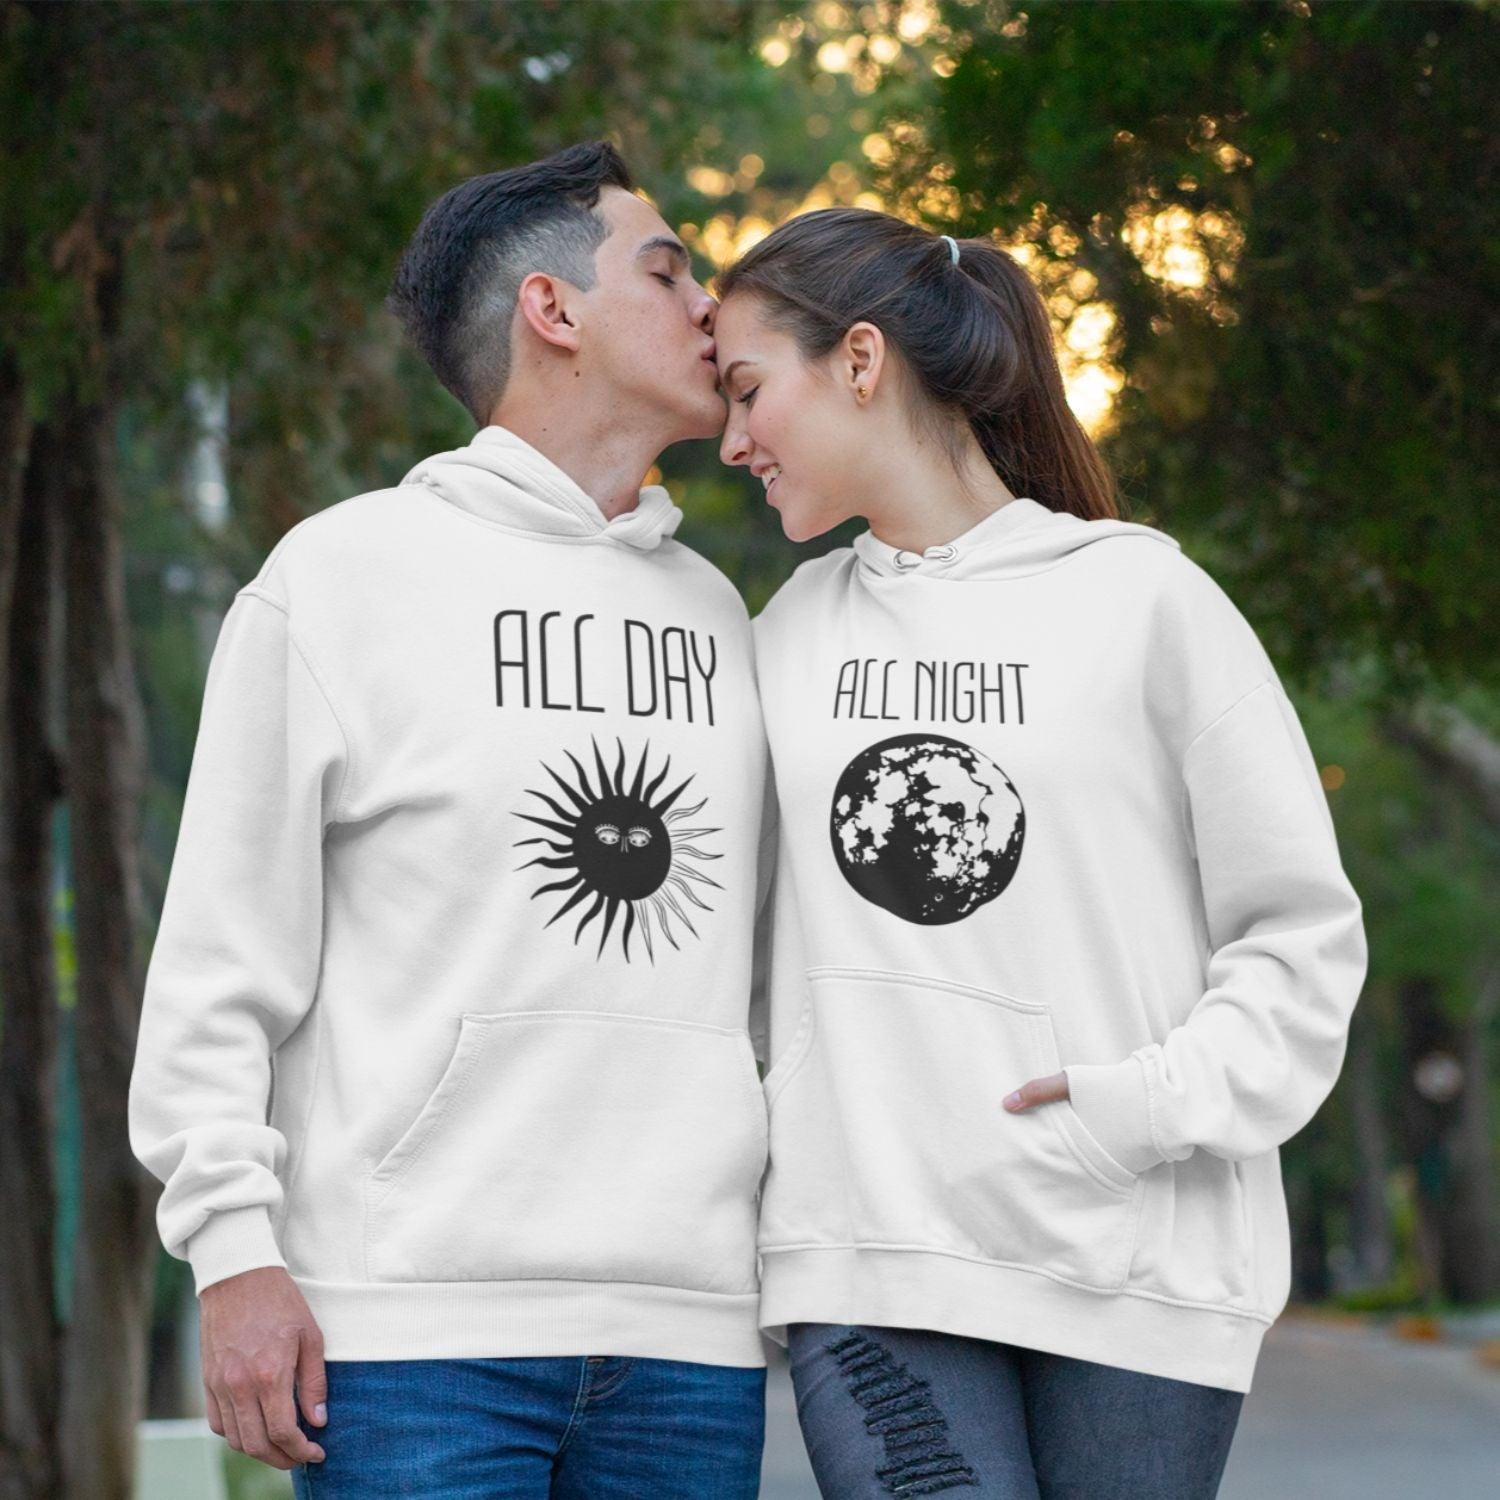 Moon Sun Matching Set: All Night/All Day Gifts for Couples, Perfect Wedding Presents - 4Lovebirds